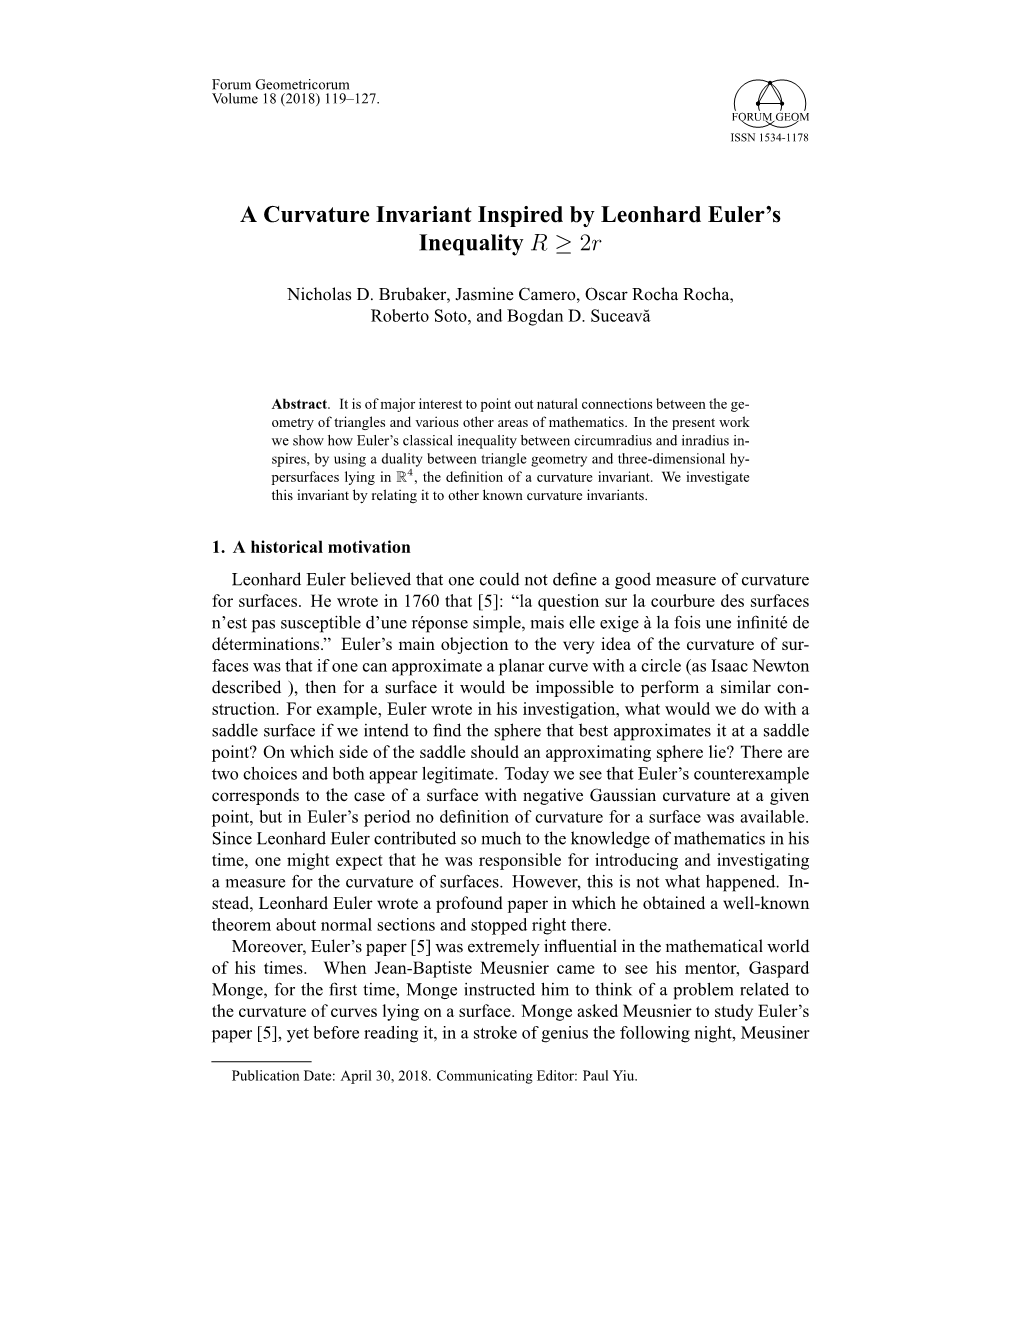 A Curvature Invariant Inspired by Leonhard Euler's Inequality R ≥ 2Г